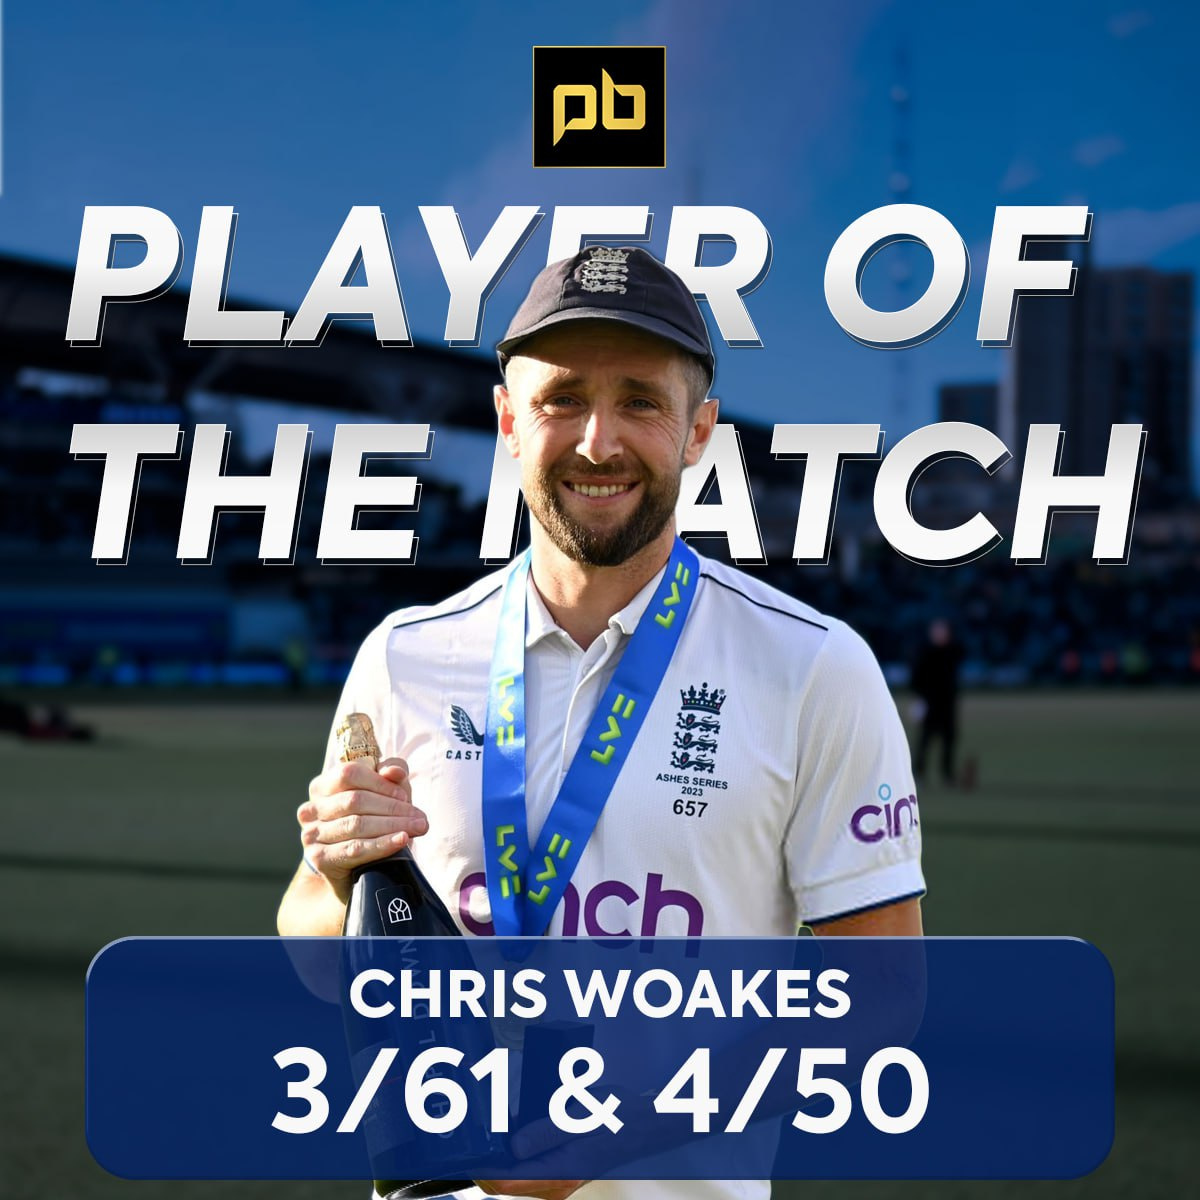 The Ashes 2023 England vs Australia 5th Test - England clinch a thriller to draw Ashes 2-2.
.
#ashes #test #cricket #chriswoakes #ashes2023 #england #englandcricket #australia #australiacricket #livescore #gaming #fantasy #cricketfans #rummy #rummyfans #casino #casinolover